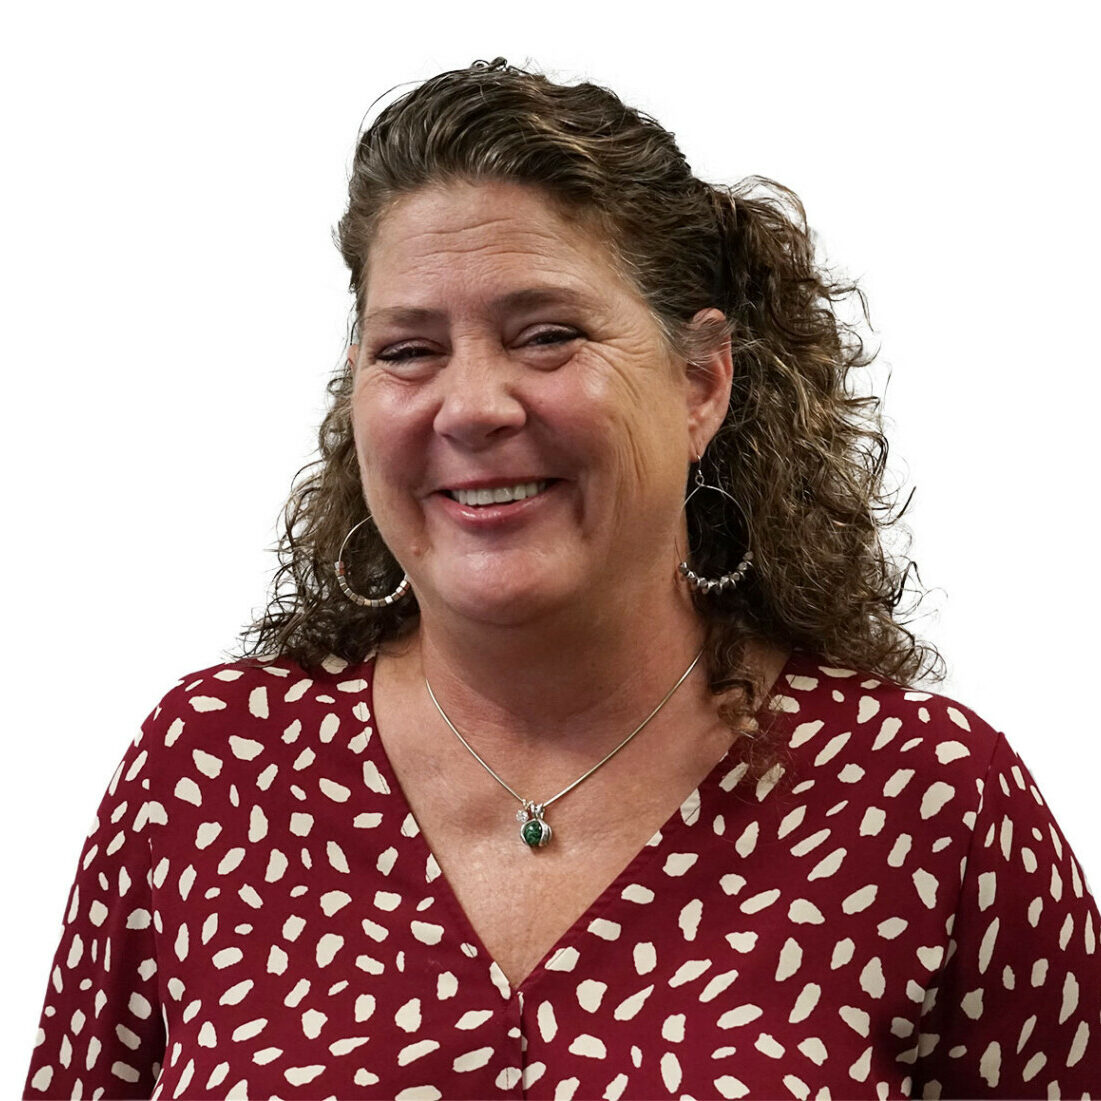 Michelle Perskins, Senior Assistive Technology Specialist